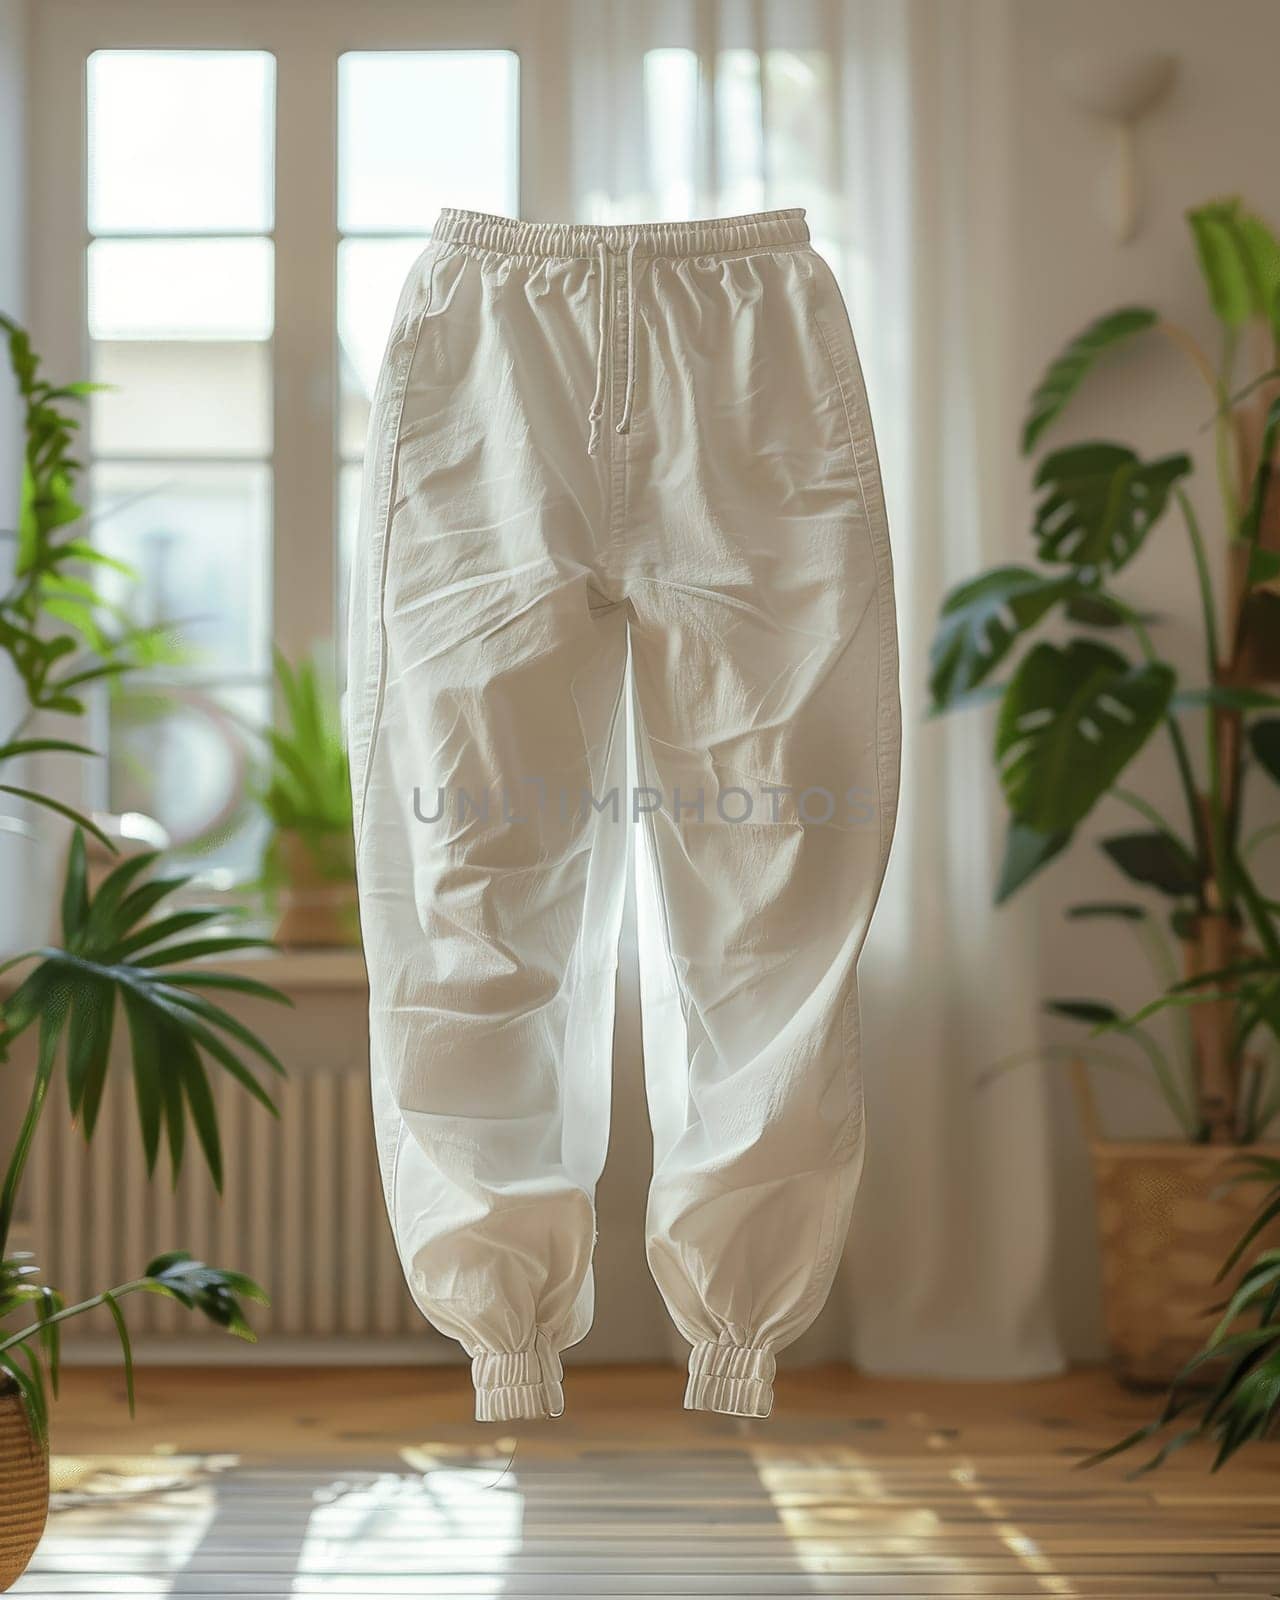 A pair of white pants is hanging in a room with a window and a potted plant. The pants are white and have a casual, relaxed vibe